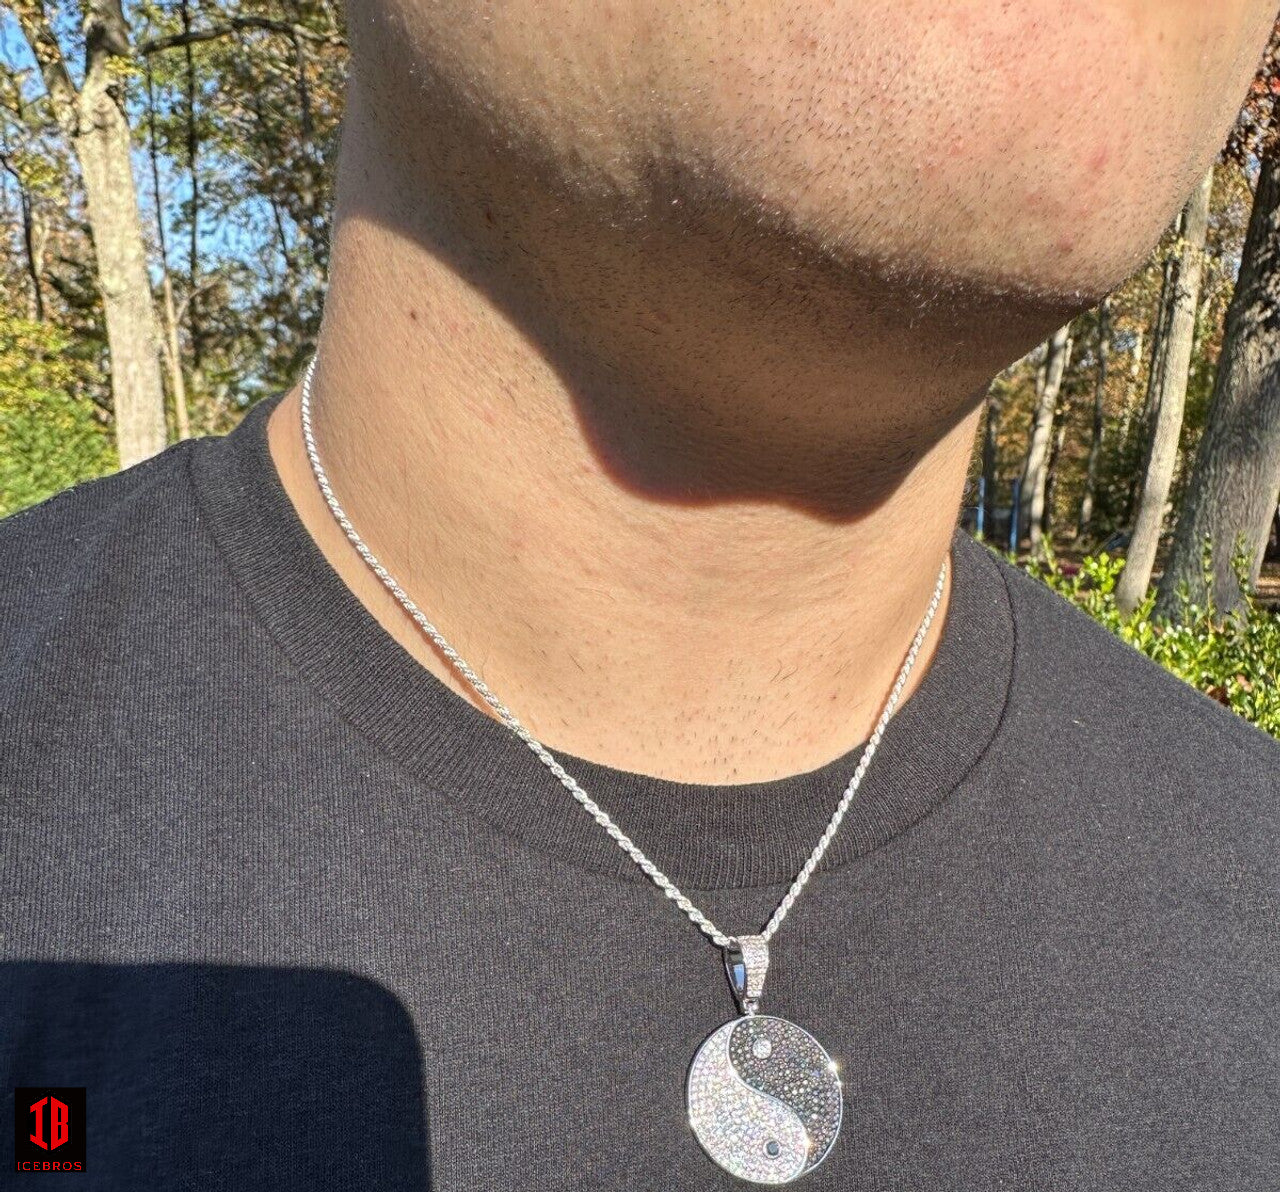 Men Model Wearing Shinning 14k White Gold Ying Yang Pendant Necklace With 14k White Gold Rope Chain 